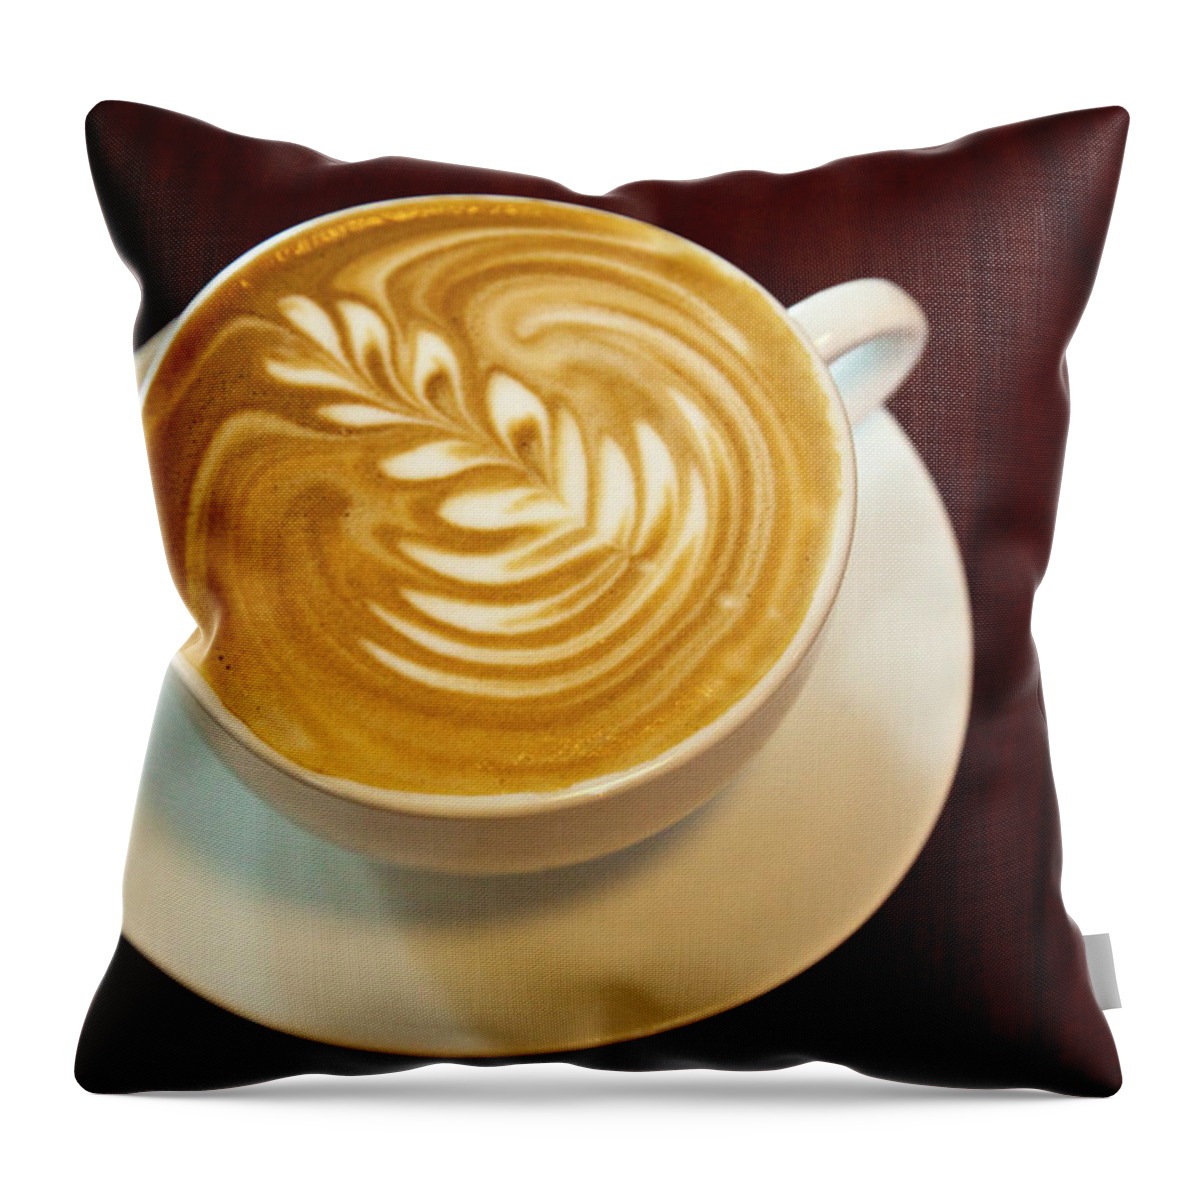 Black Background Throw Pillow featuring the photograph Cappuccino Foam Art by Lucidio Studio, Inc.